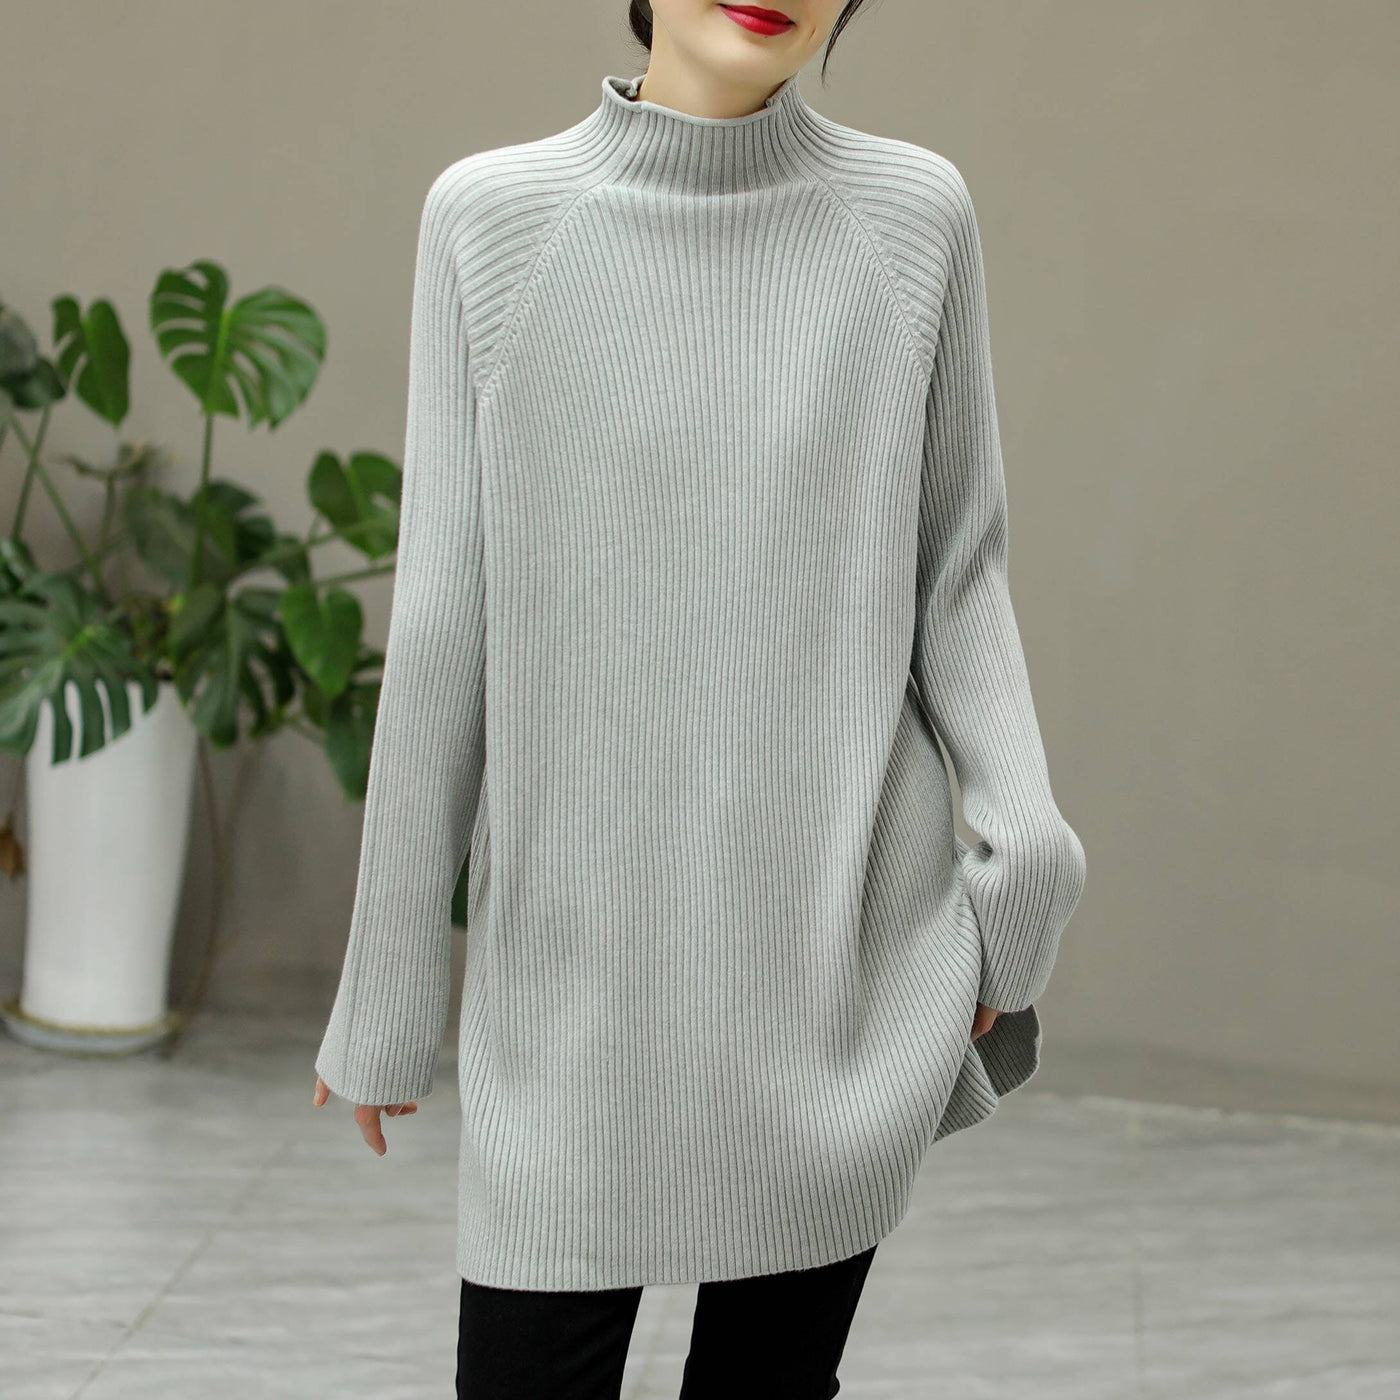 Winter Knitted Solid Stripe Turtleneck Elastic Long Sweater Dec 2022 New Arrival One Size Gray 